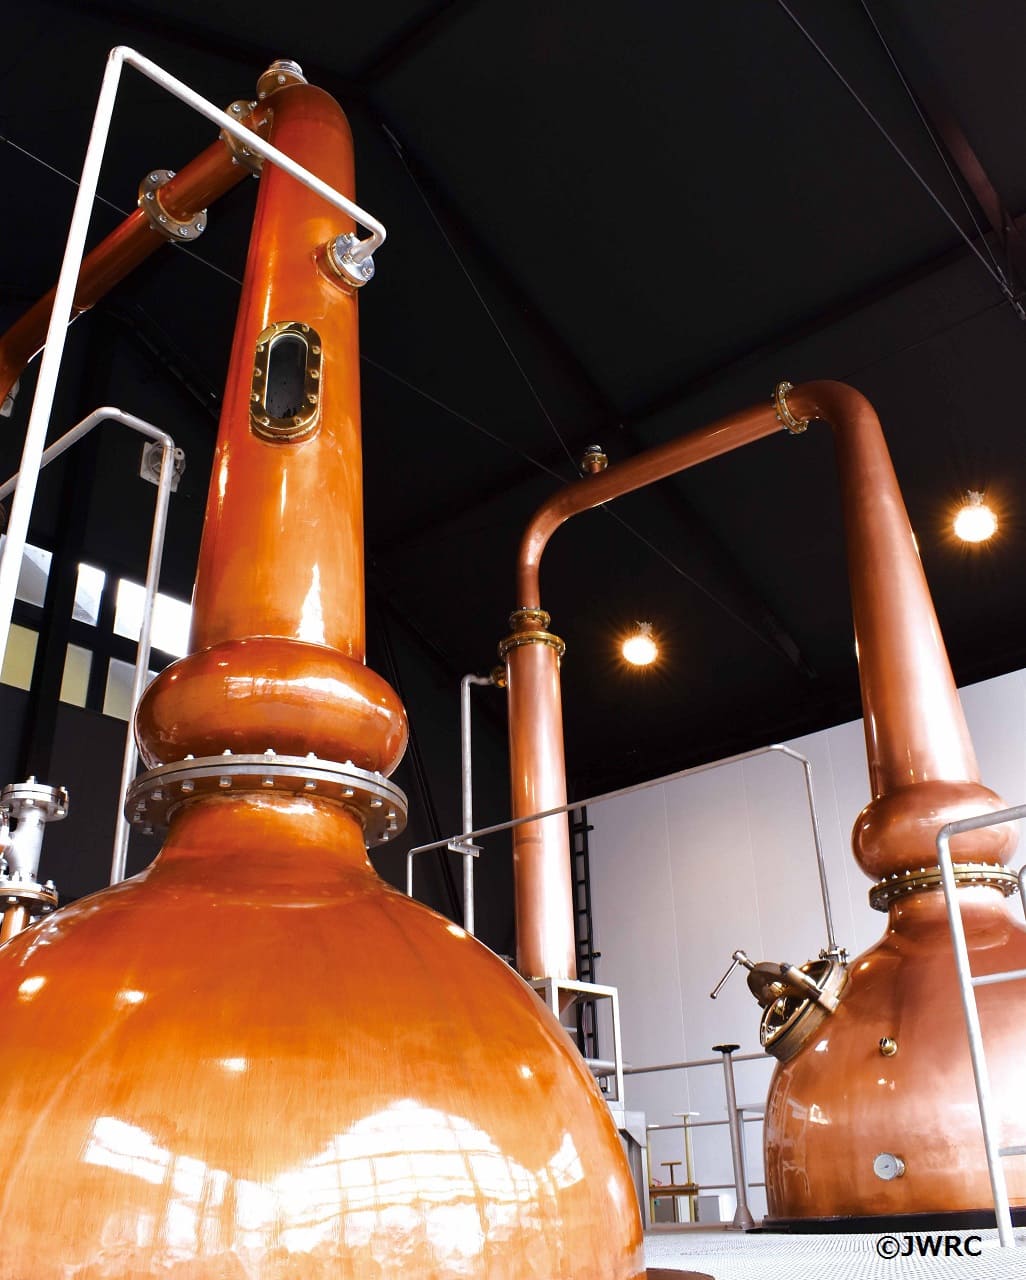 [Whisky Galore] Kaikyo Distillery: Fusing Japanese alcohol and Scotch traditions in Hyogo